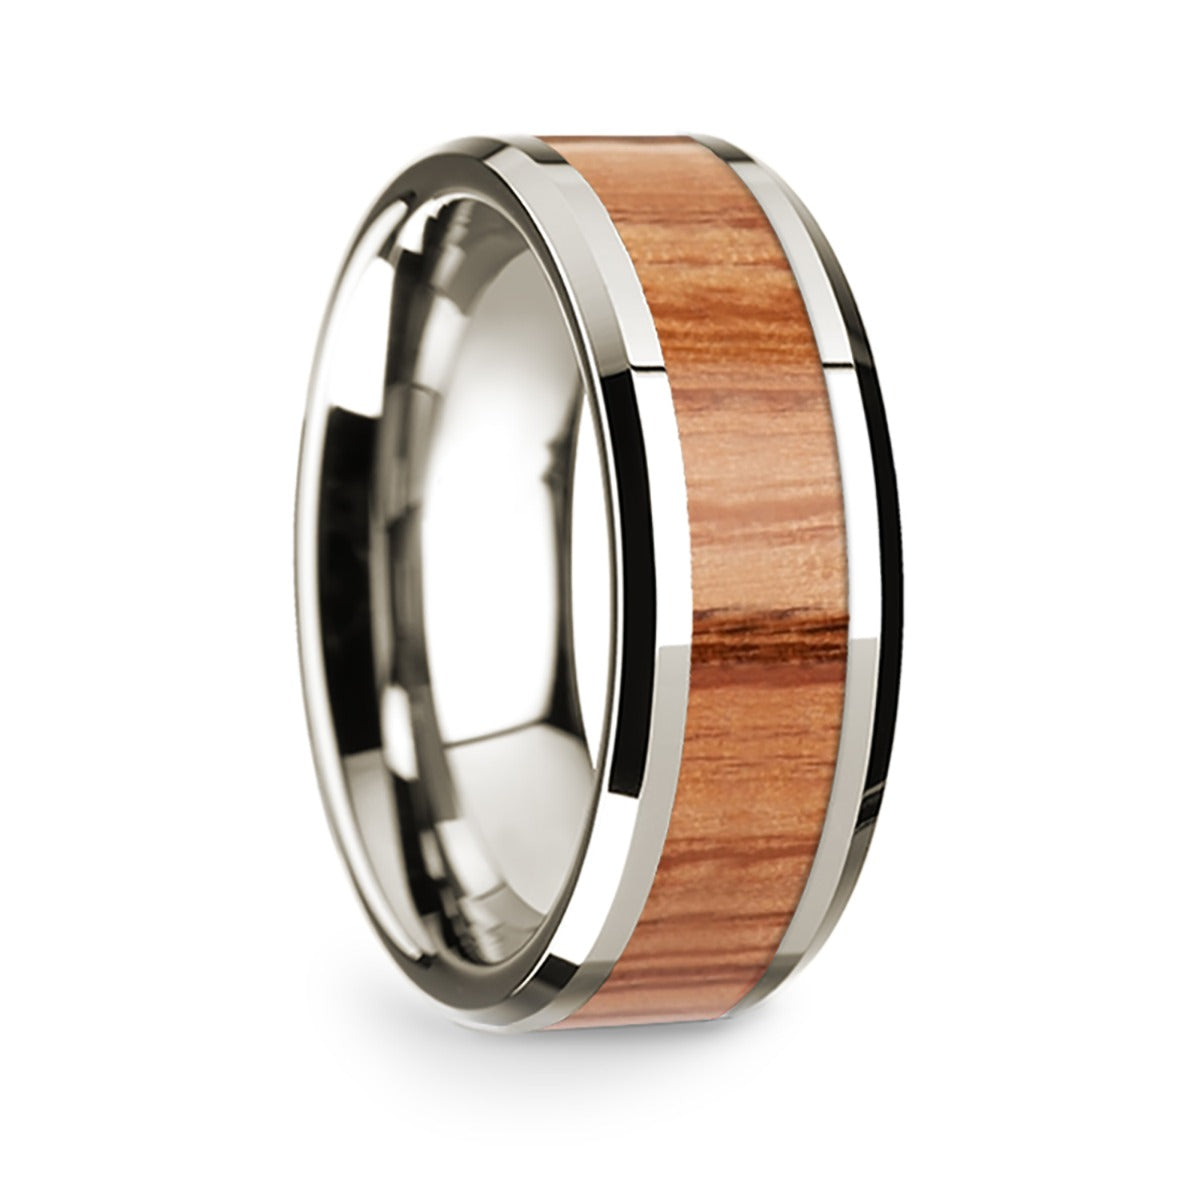 14k White Gold Men's Wedding Band with Red Oak Wood Inlay